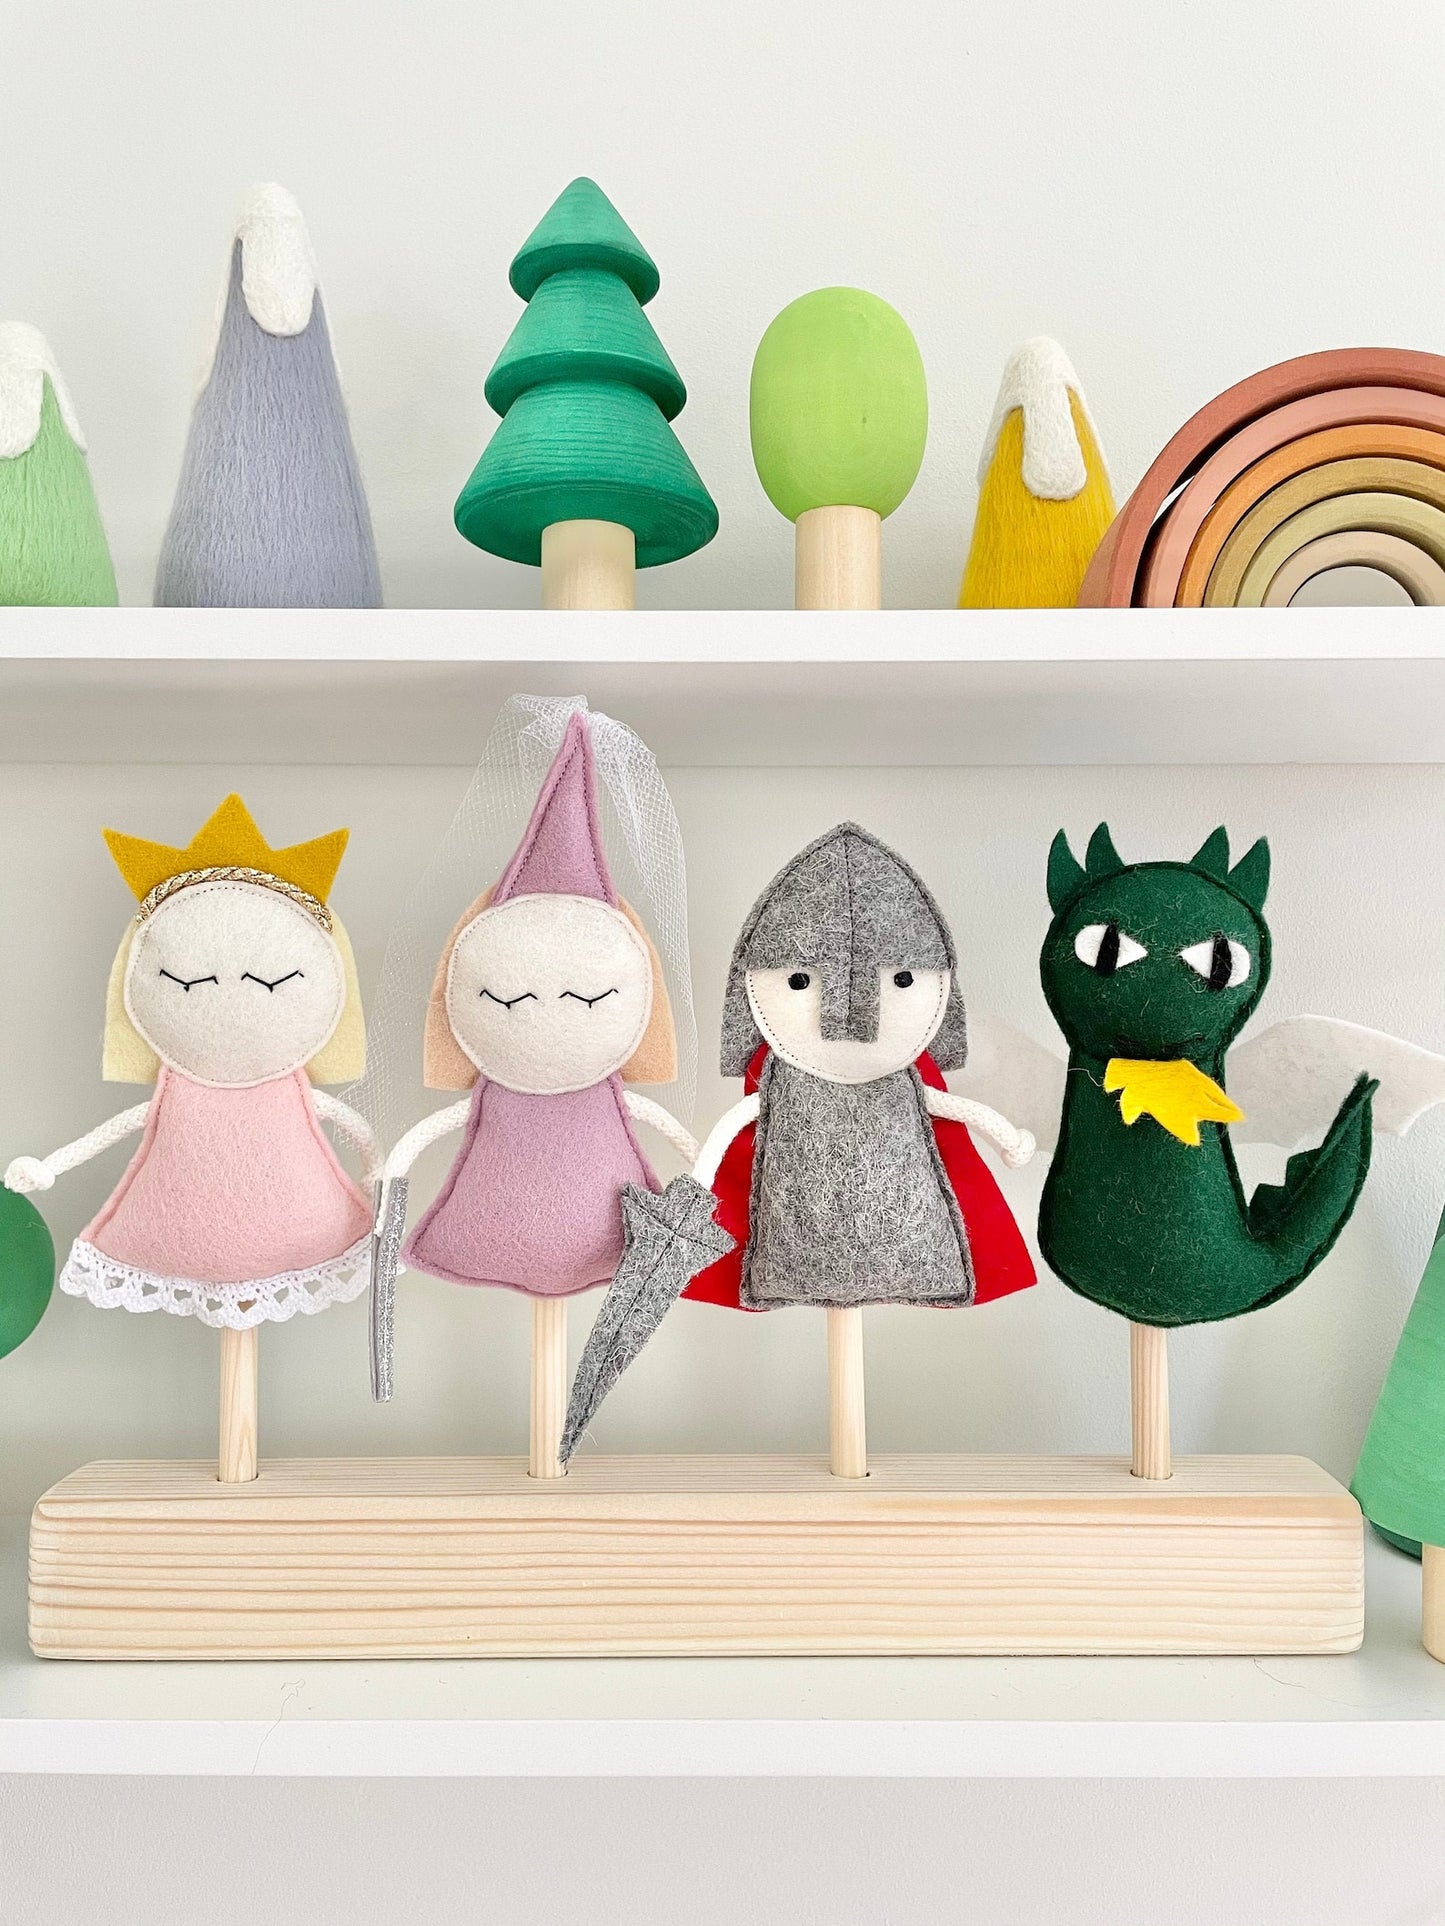 Fairy Tale 4-Puppets Set for MIMIKI puppet theatre